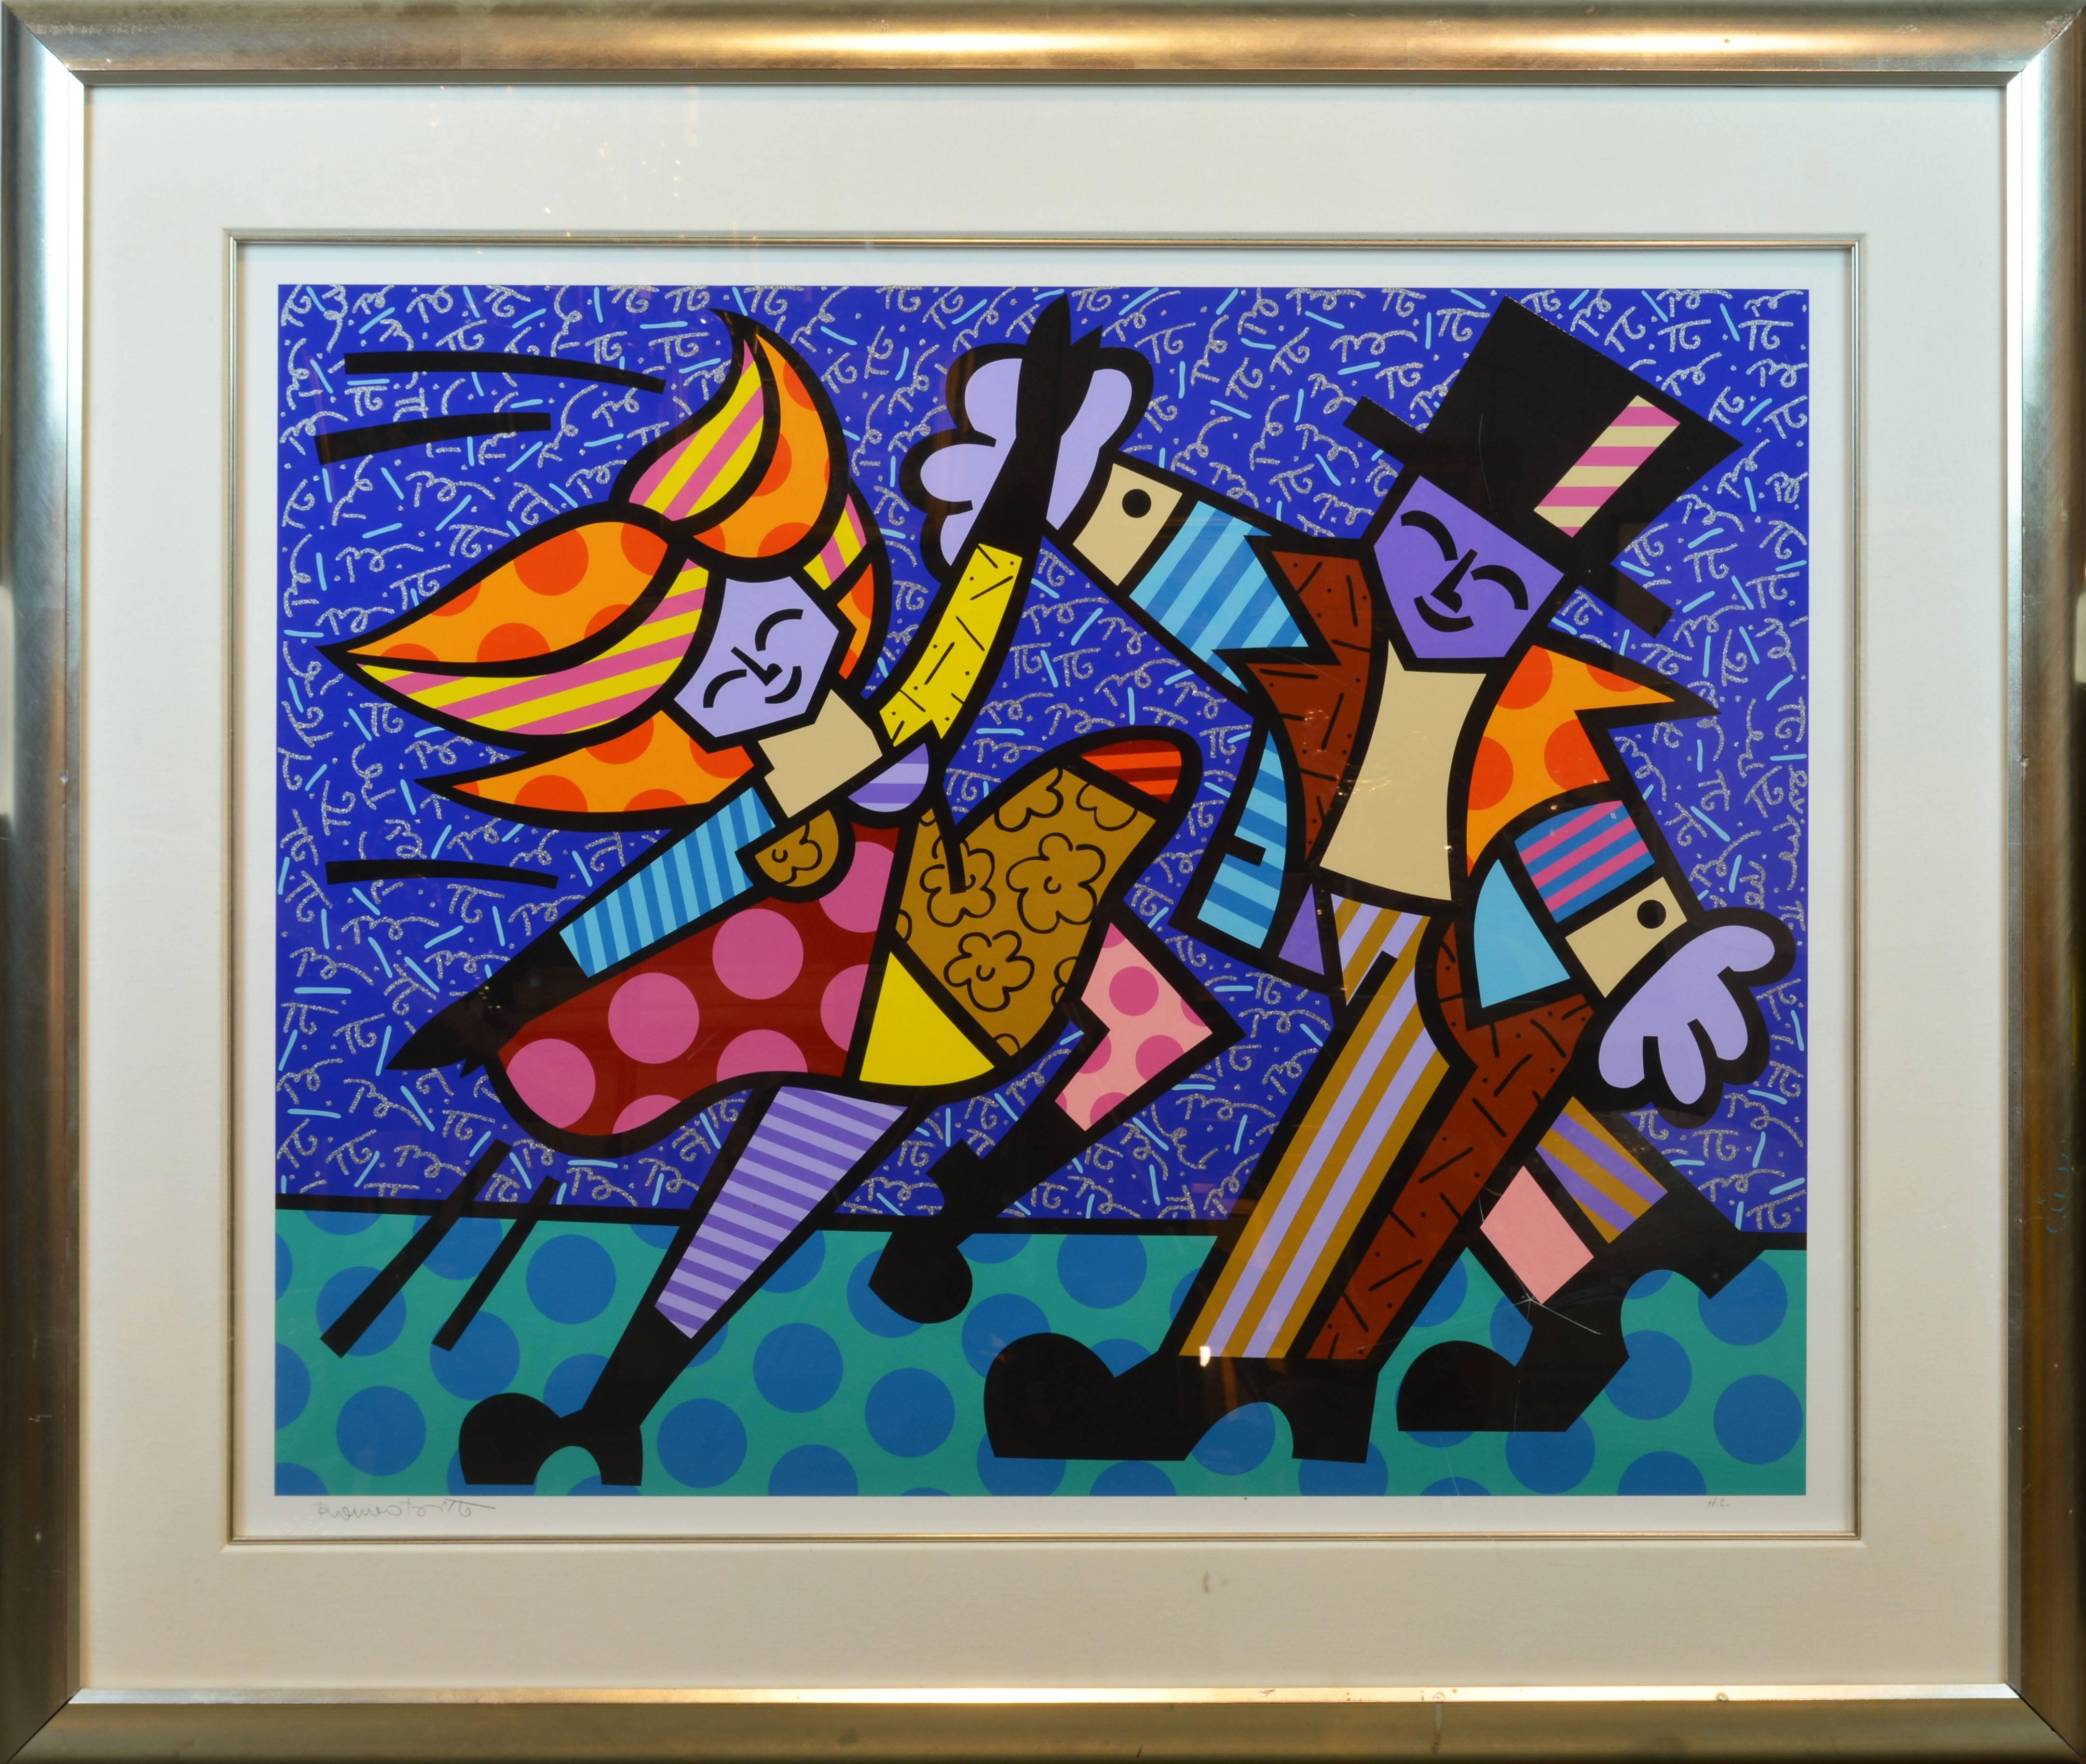 A rare vintage serigraph by Romero Britto 'Dancing Couple' signed by the artist in pencil and annotated H. C. (hors commerce, usually an extension of a limited edition). Romero Britto blind-stamp lower left margin. This image is also hand